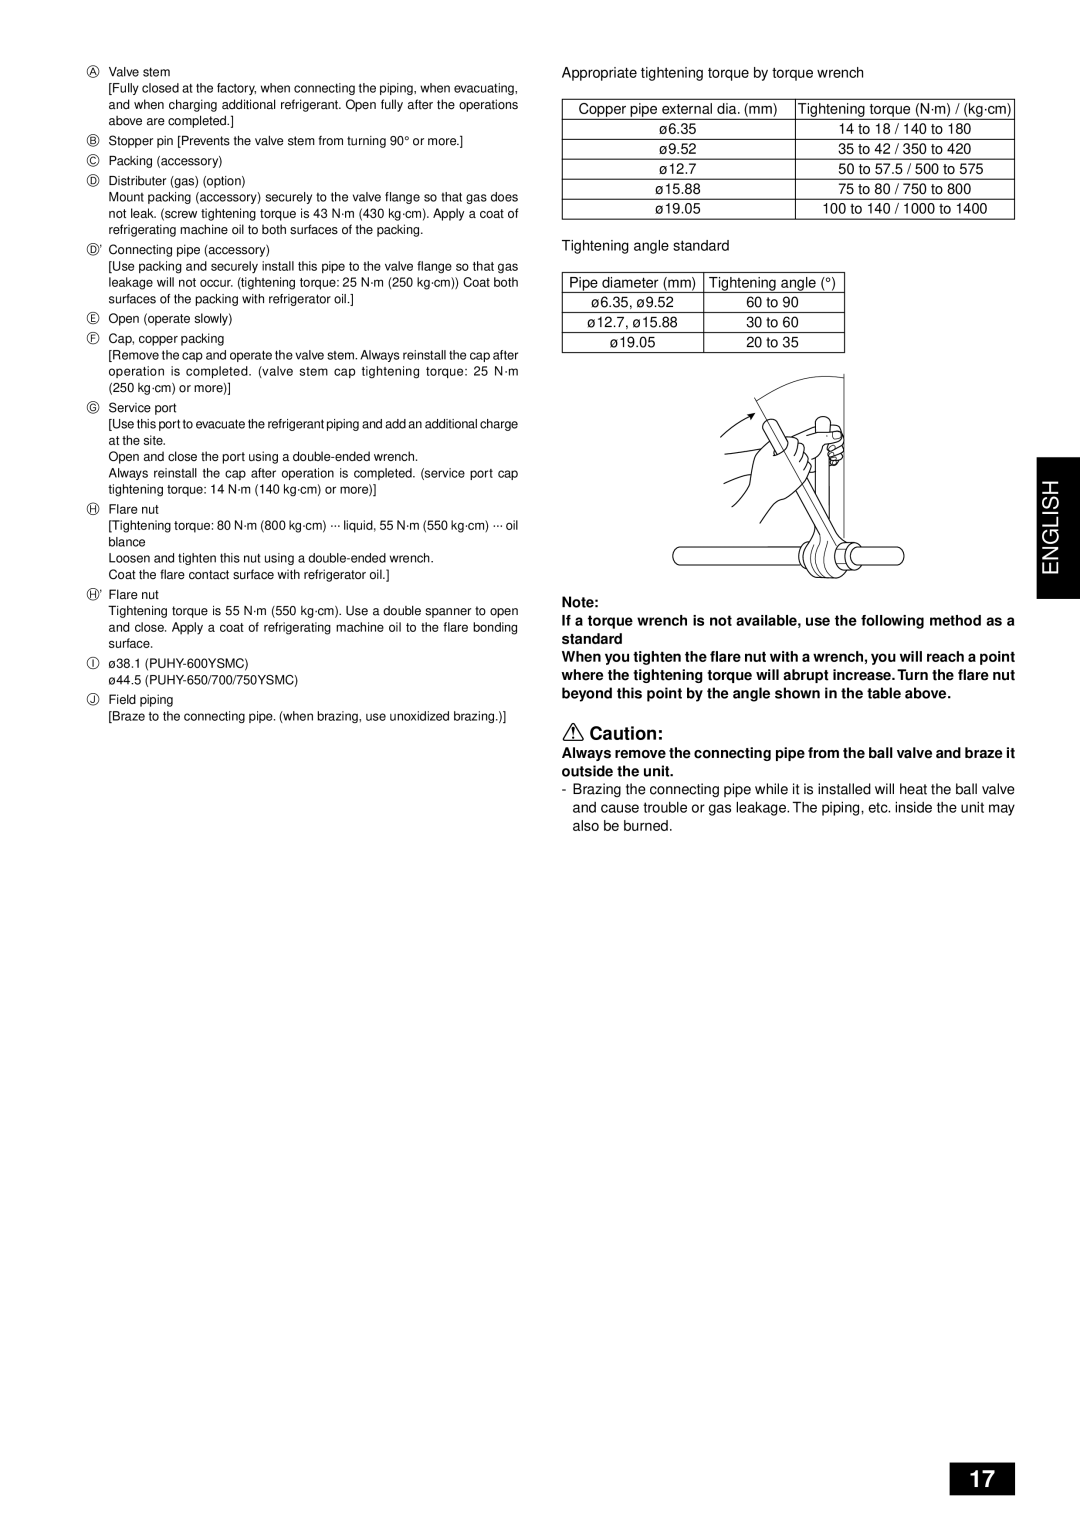 Mitsubishi Electronics PUHY-YMC installation manual English, Appropriate tightening torque by torque wrench 